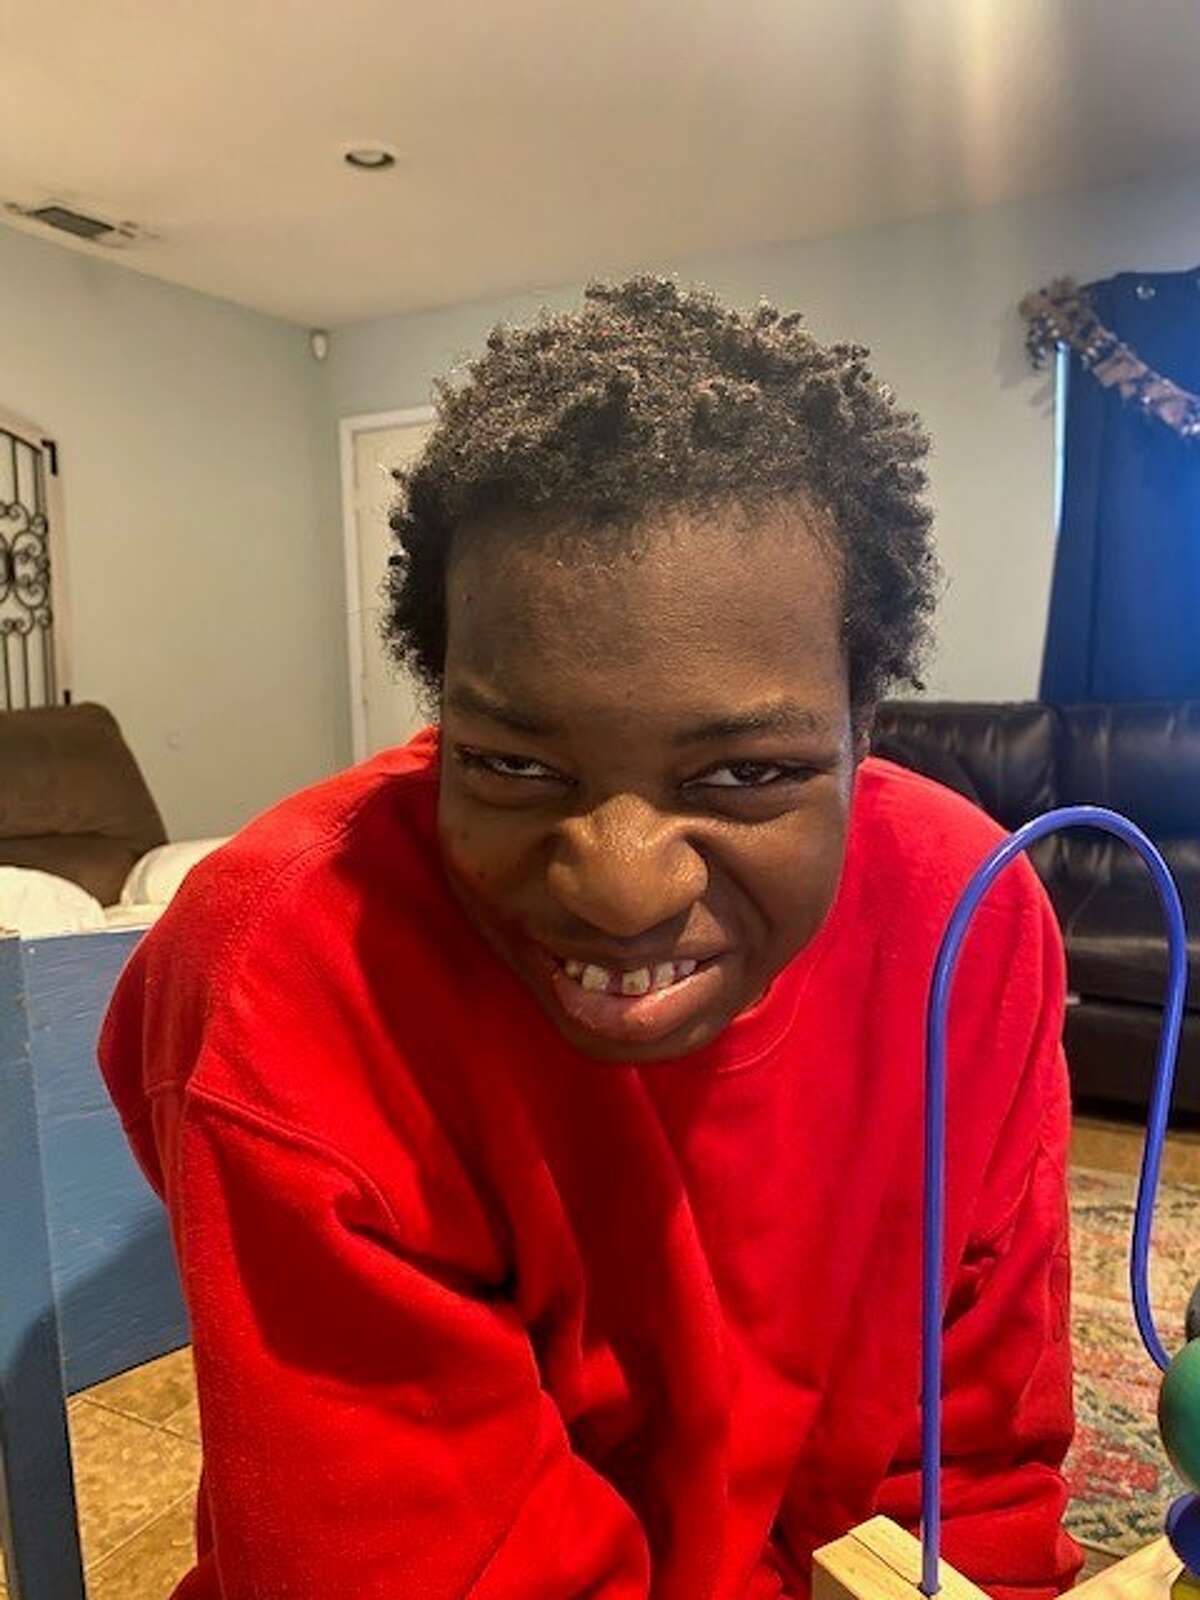 The Midland Police Department is continuing to search for the parents of a juvenile that was found unattended in central Midland on Sunday, Jan.  29.